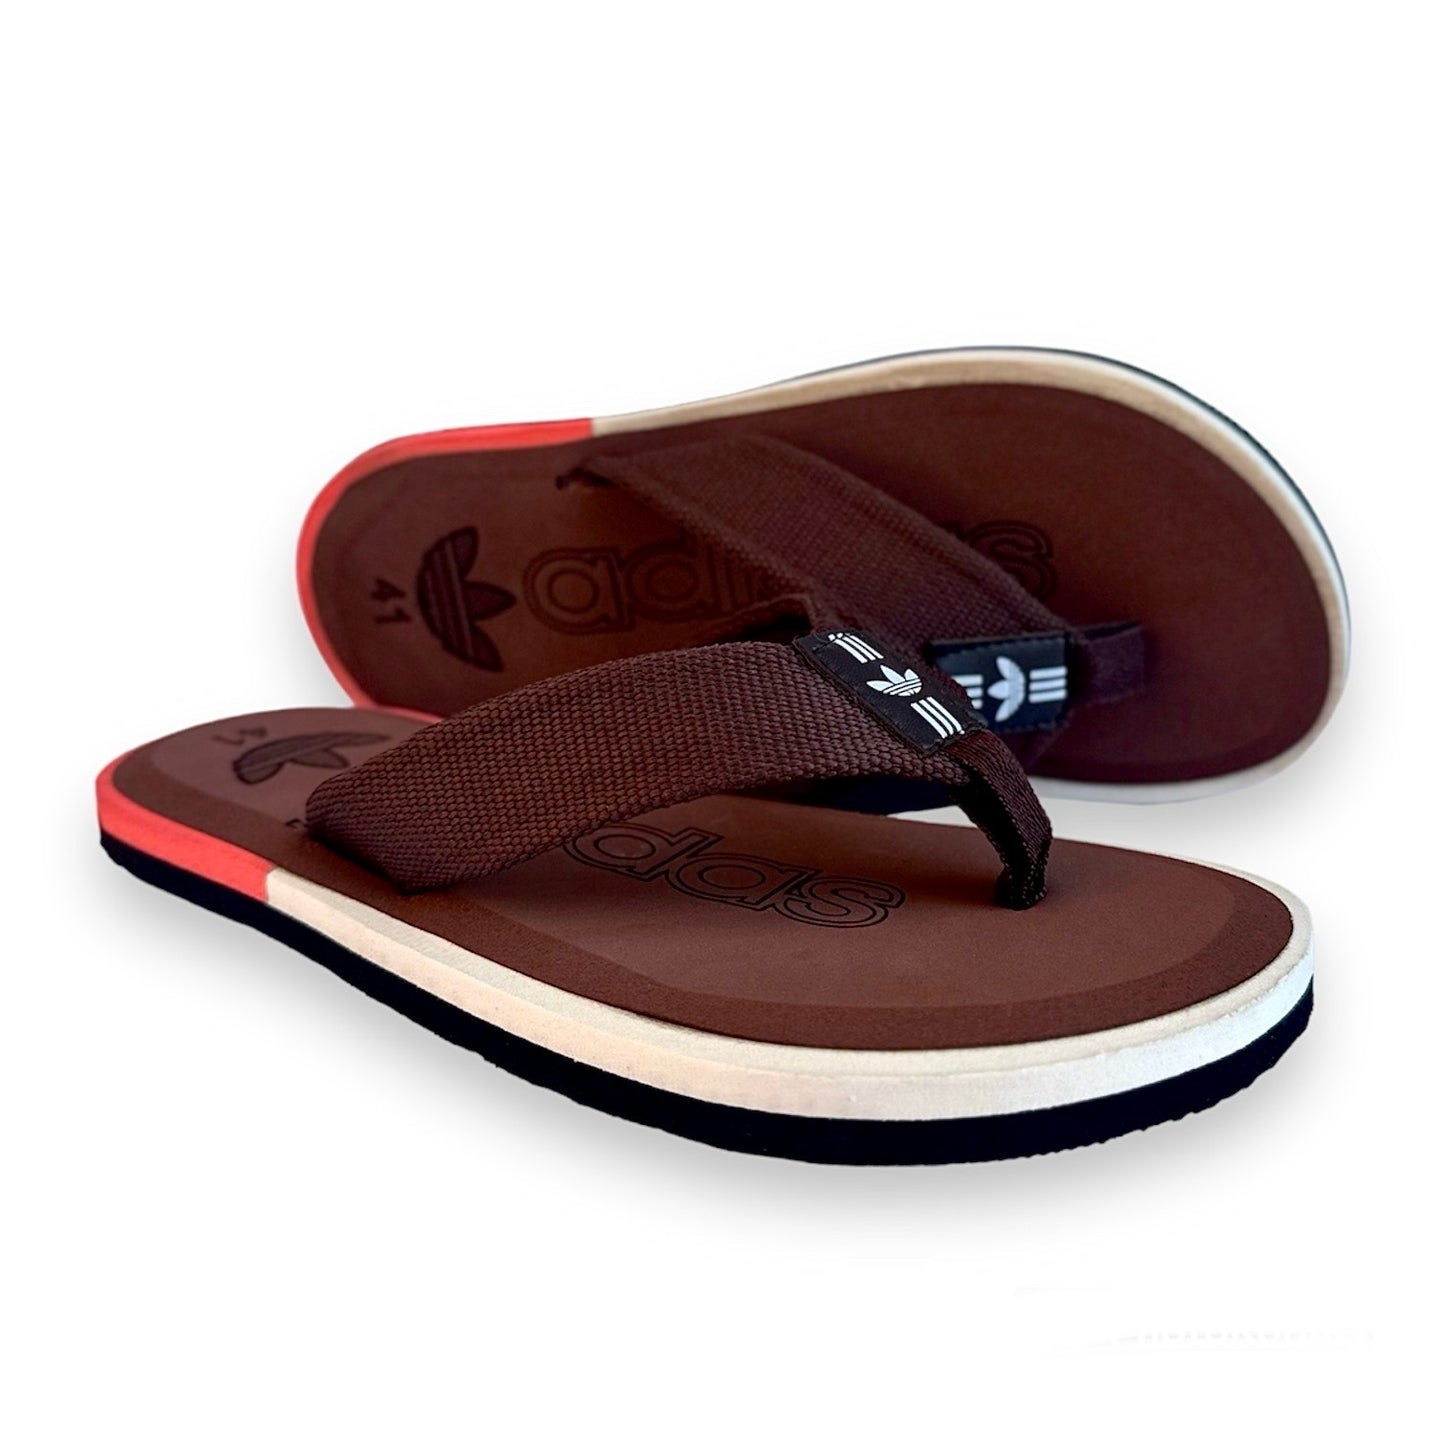 A-d-i-d-a-s slippers in brown